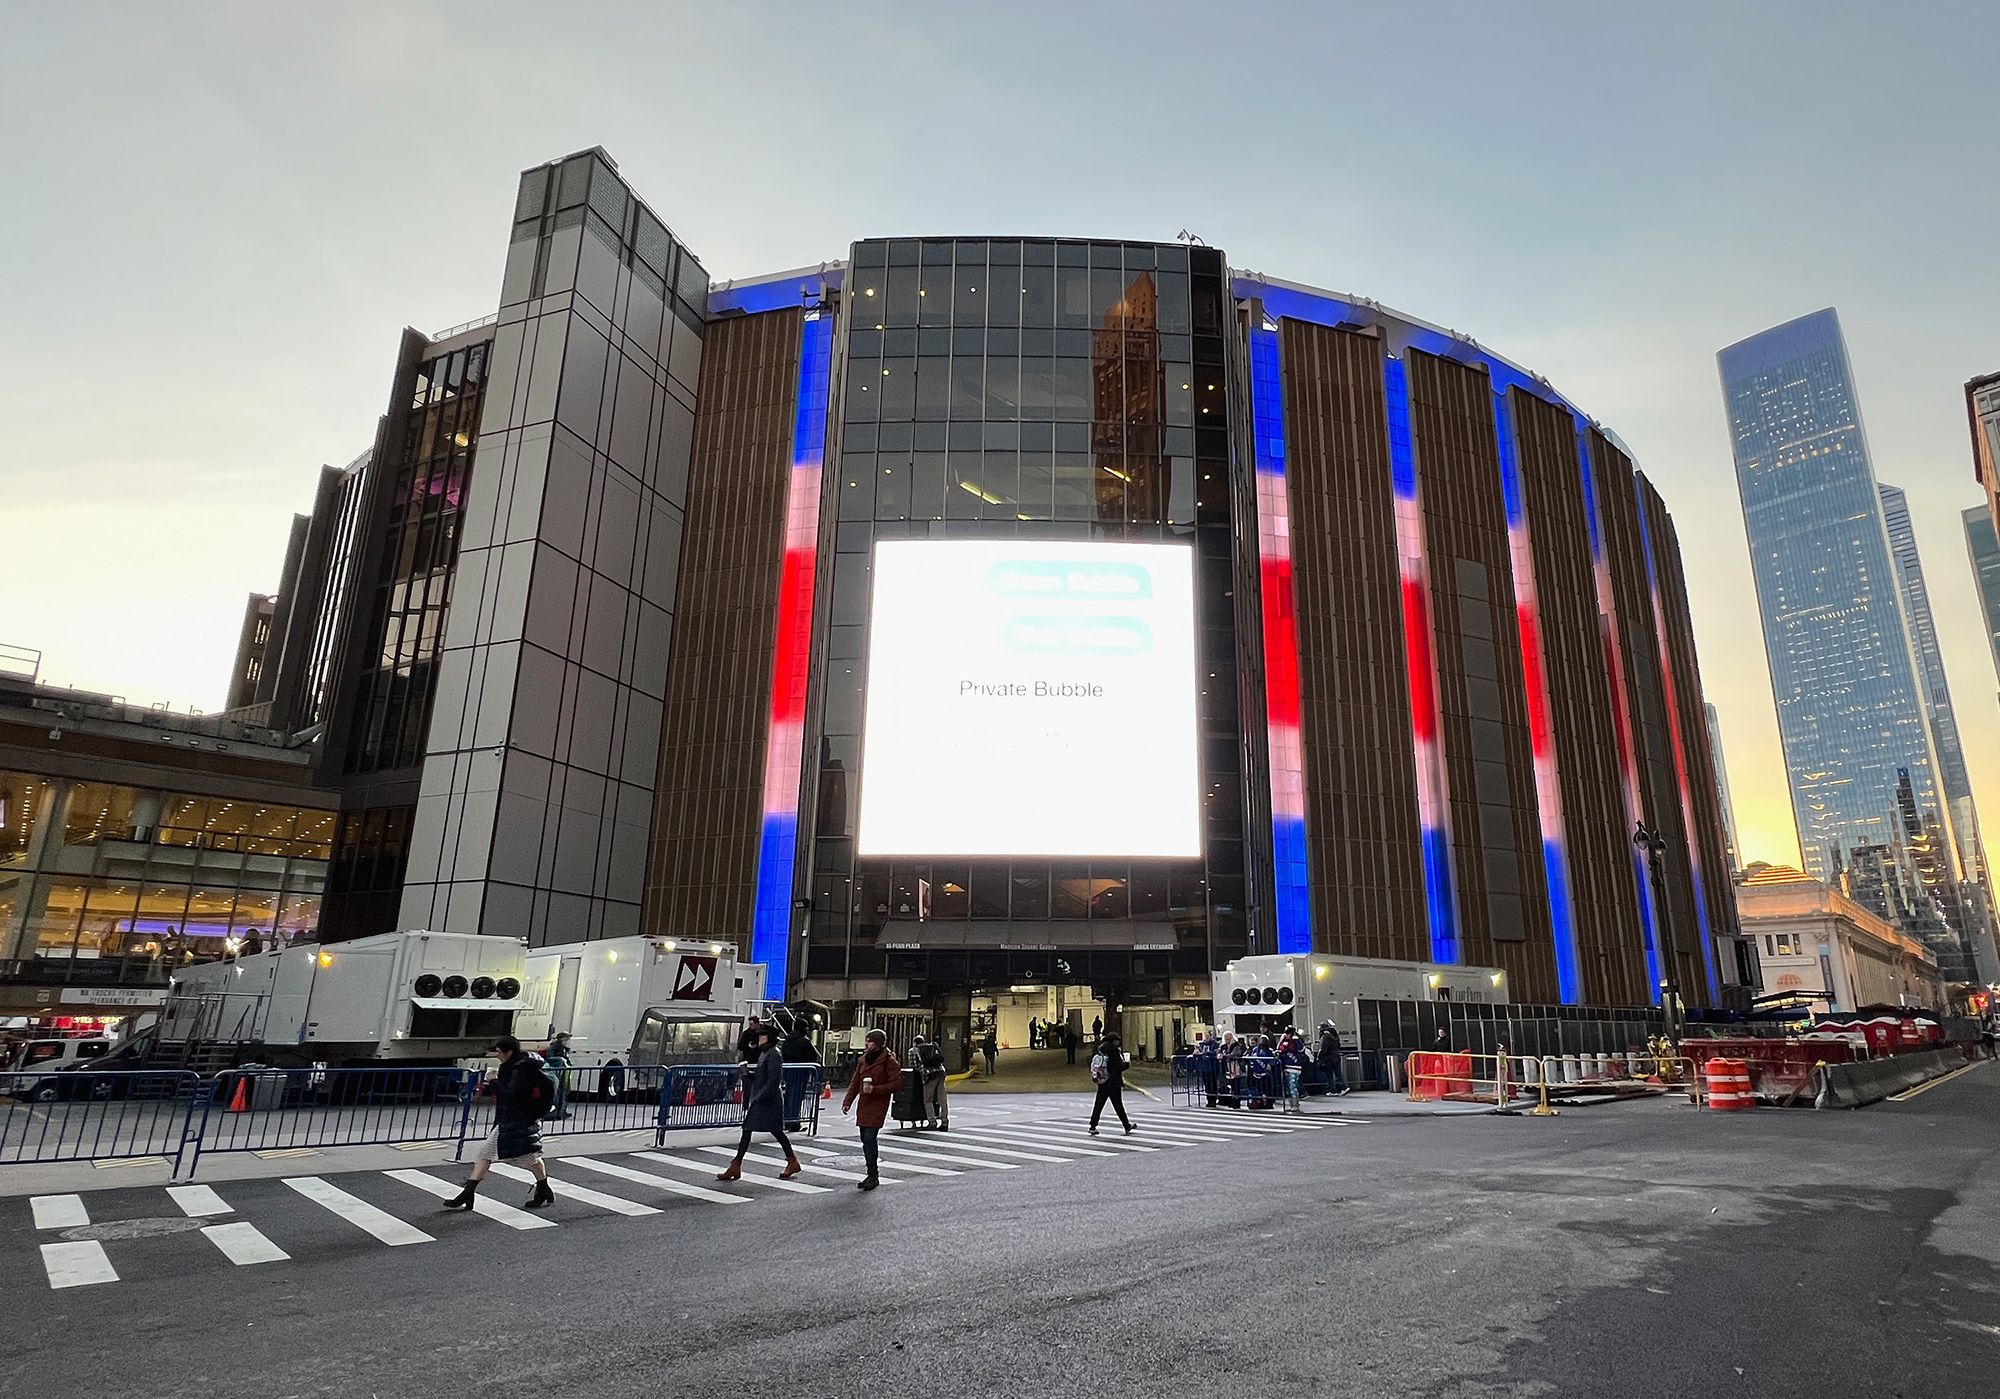 Madison Square Garden CEO doubles down on use of facial recognition tech